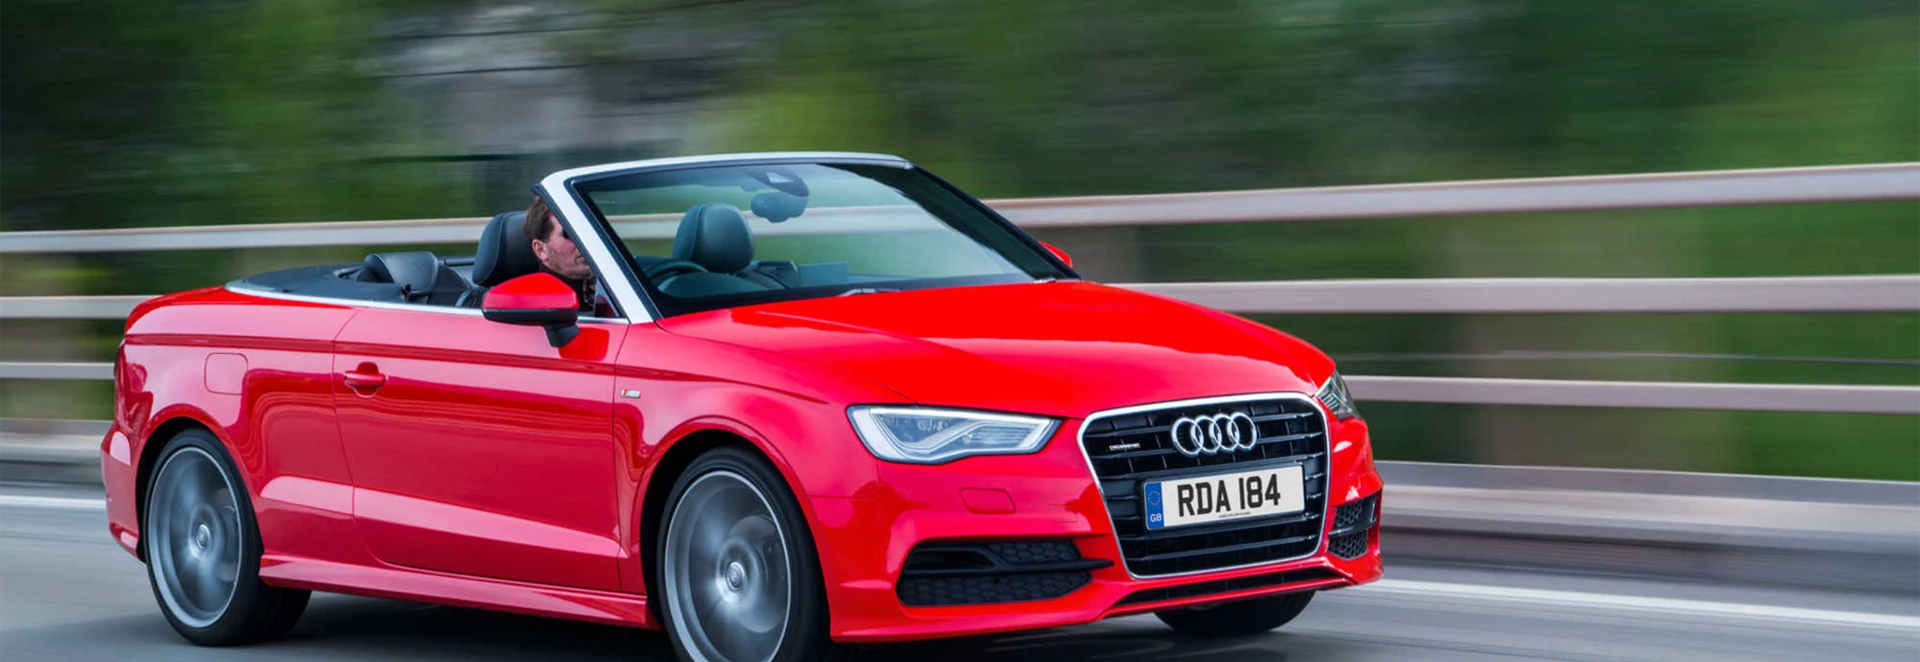 Audi A3 Cabriolet convertible review 